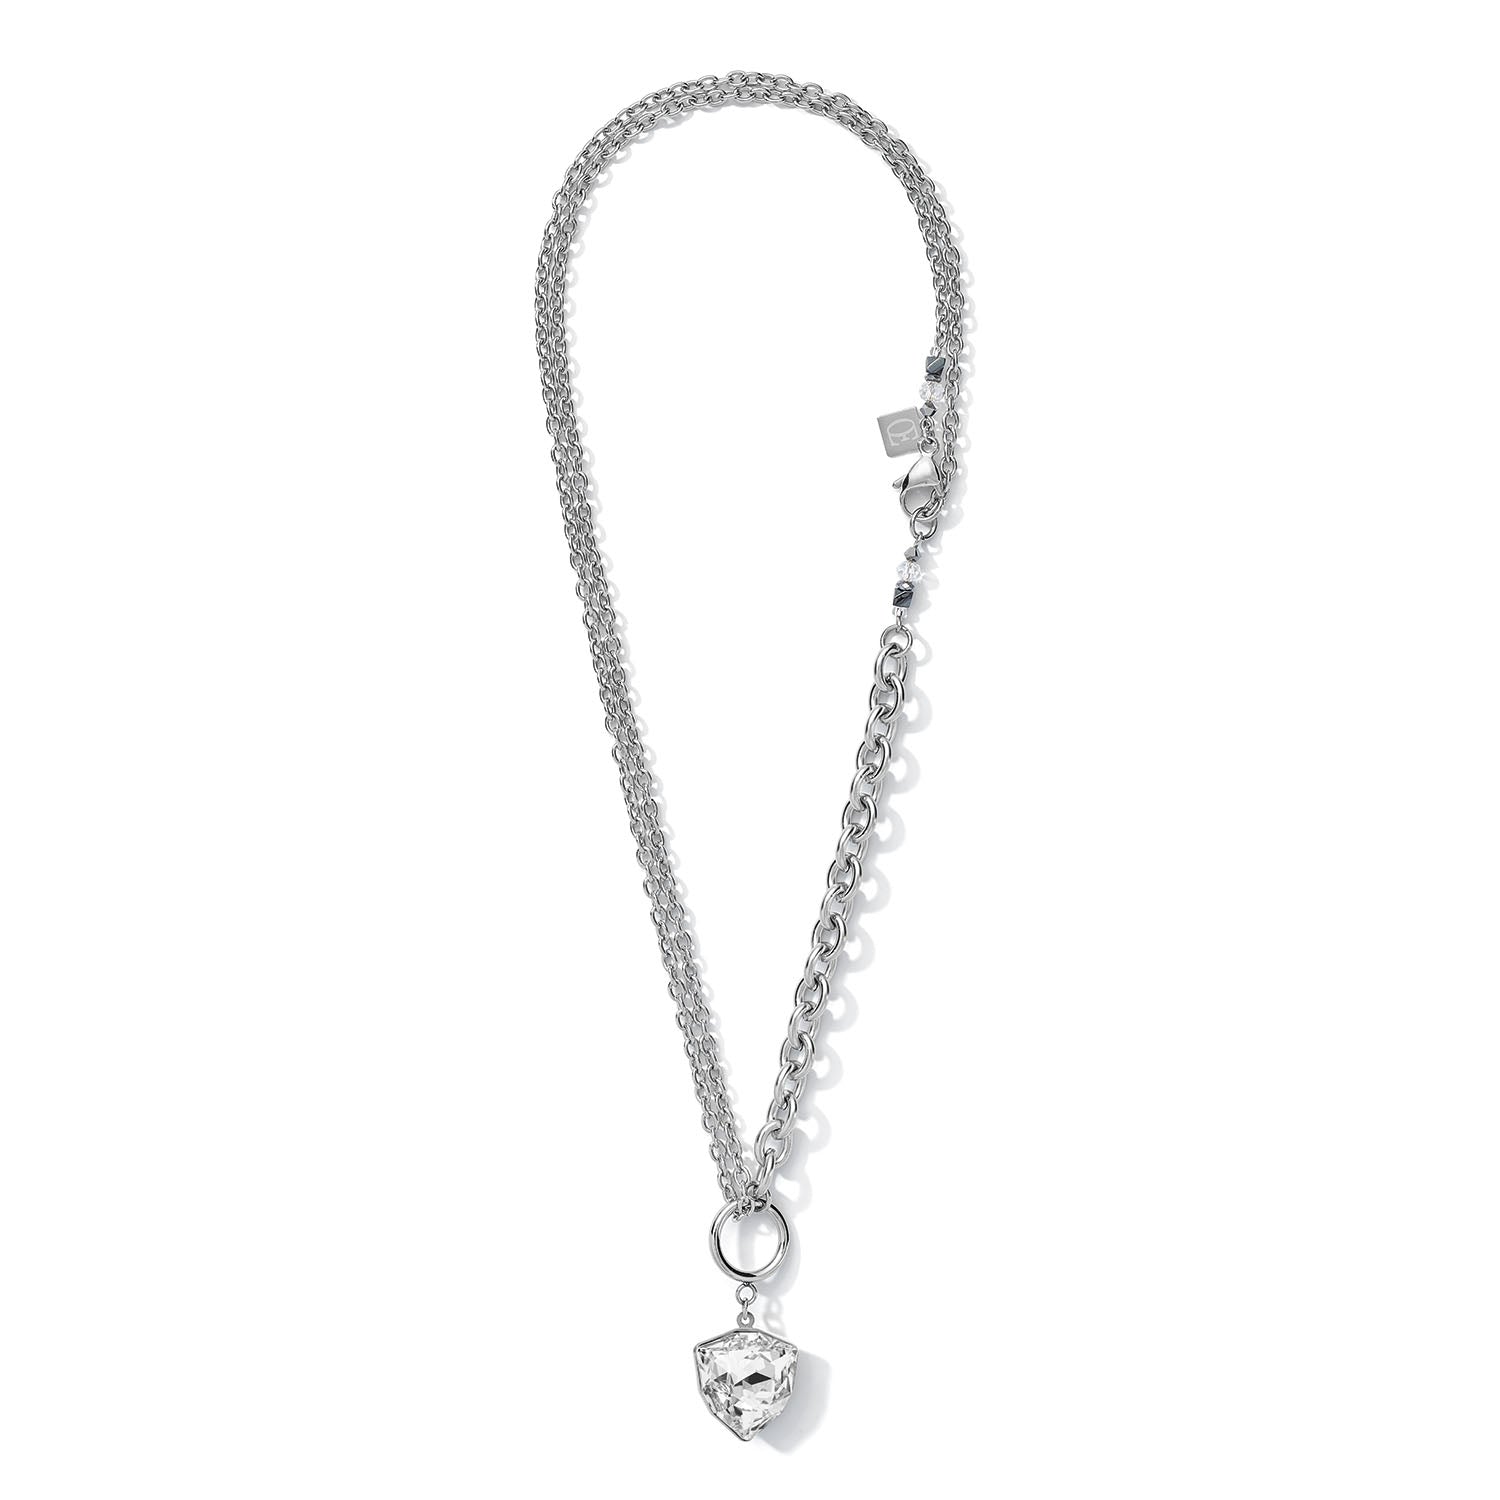 Clear European Crystal Pendant on Statement Chain Necklace 5054/10_1800